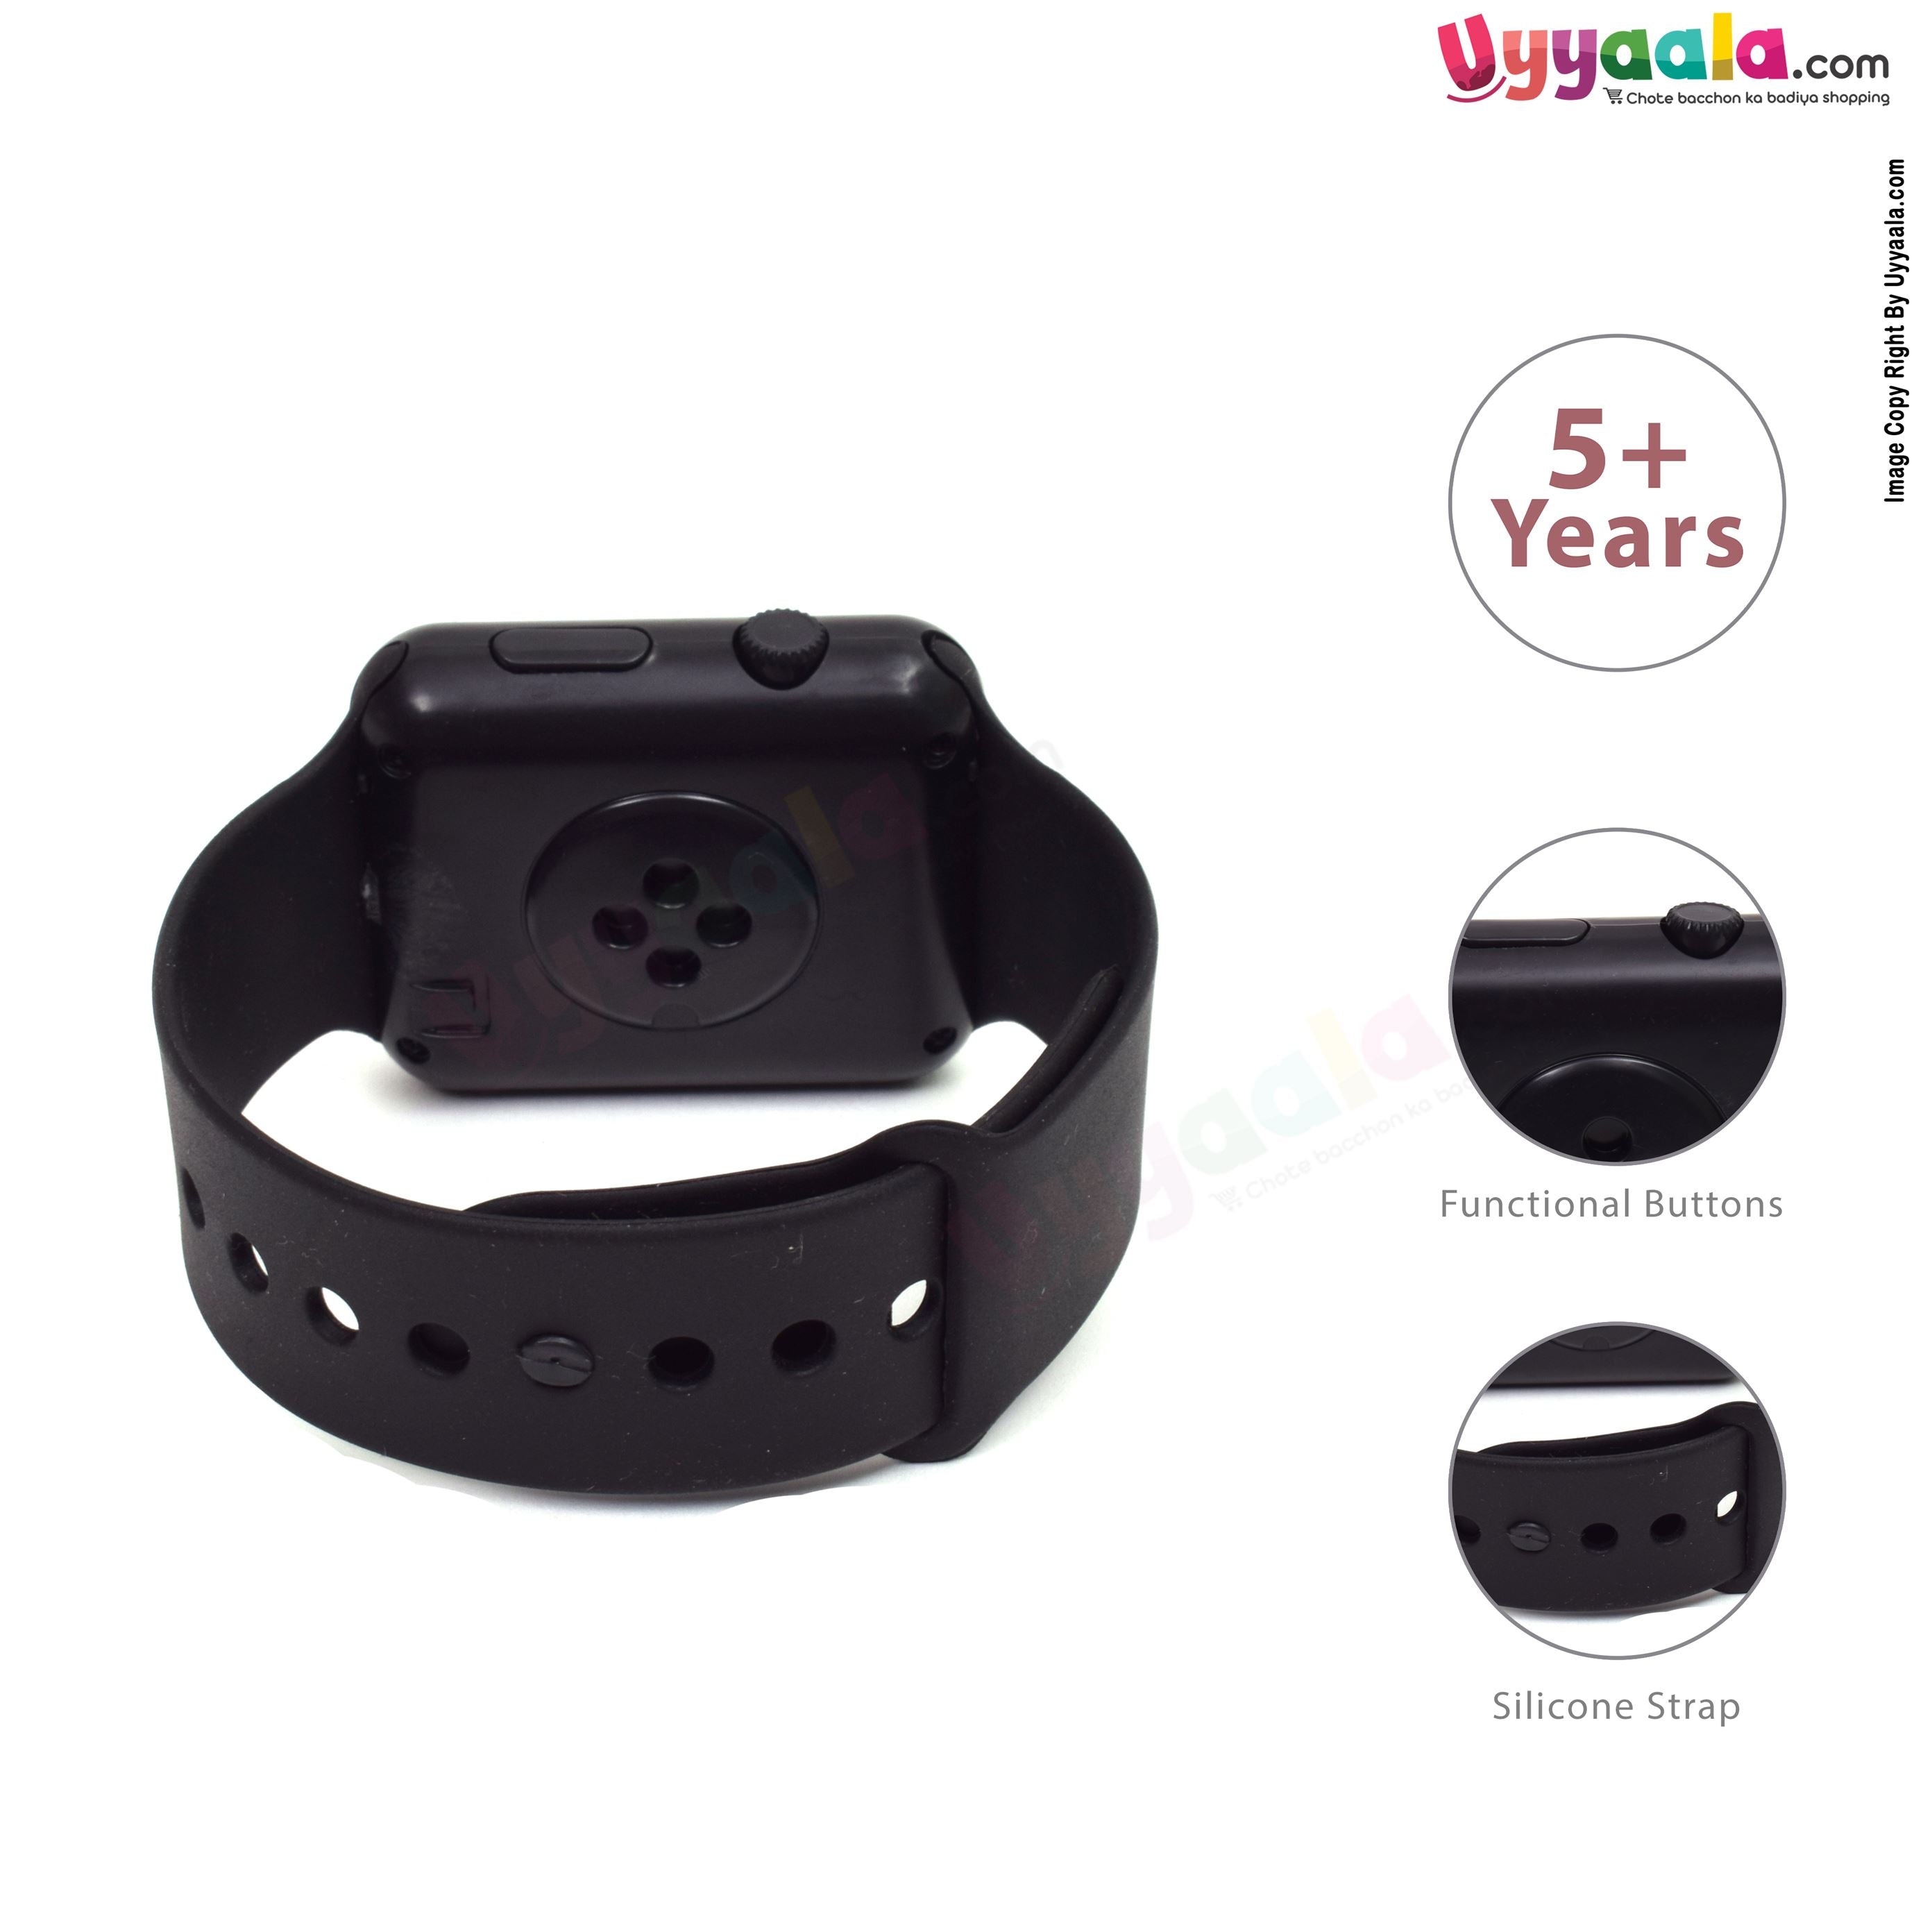 led screen watch for kids